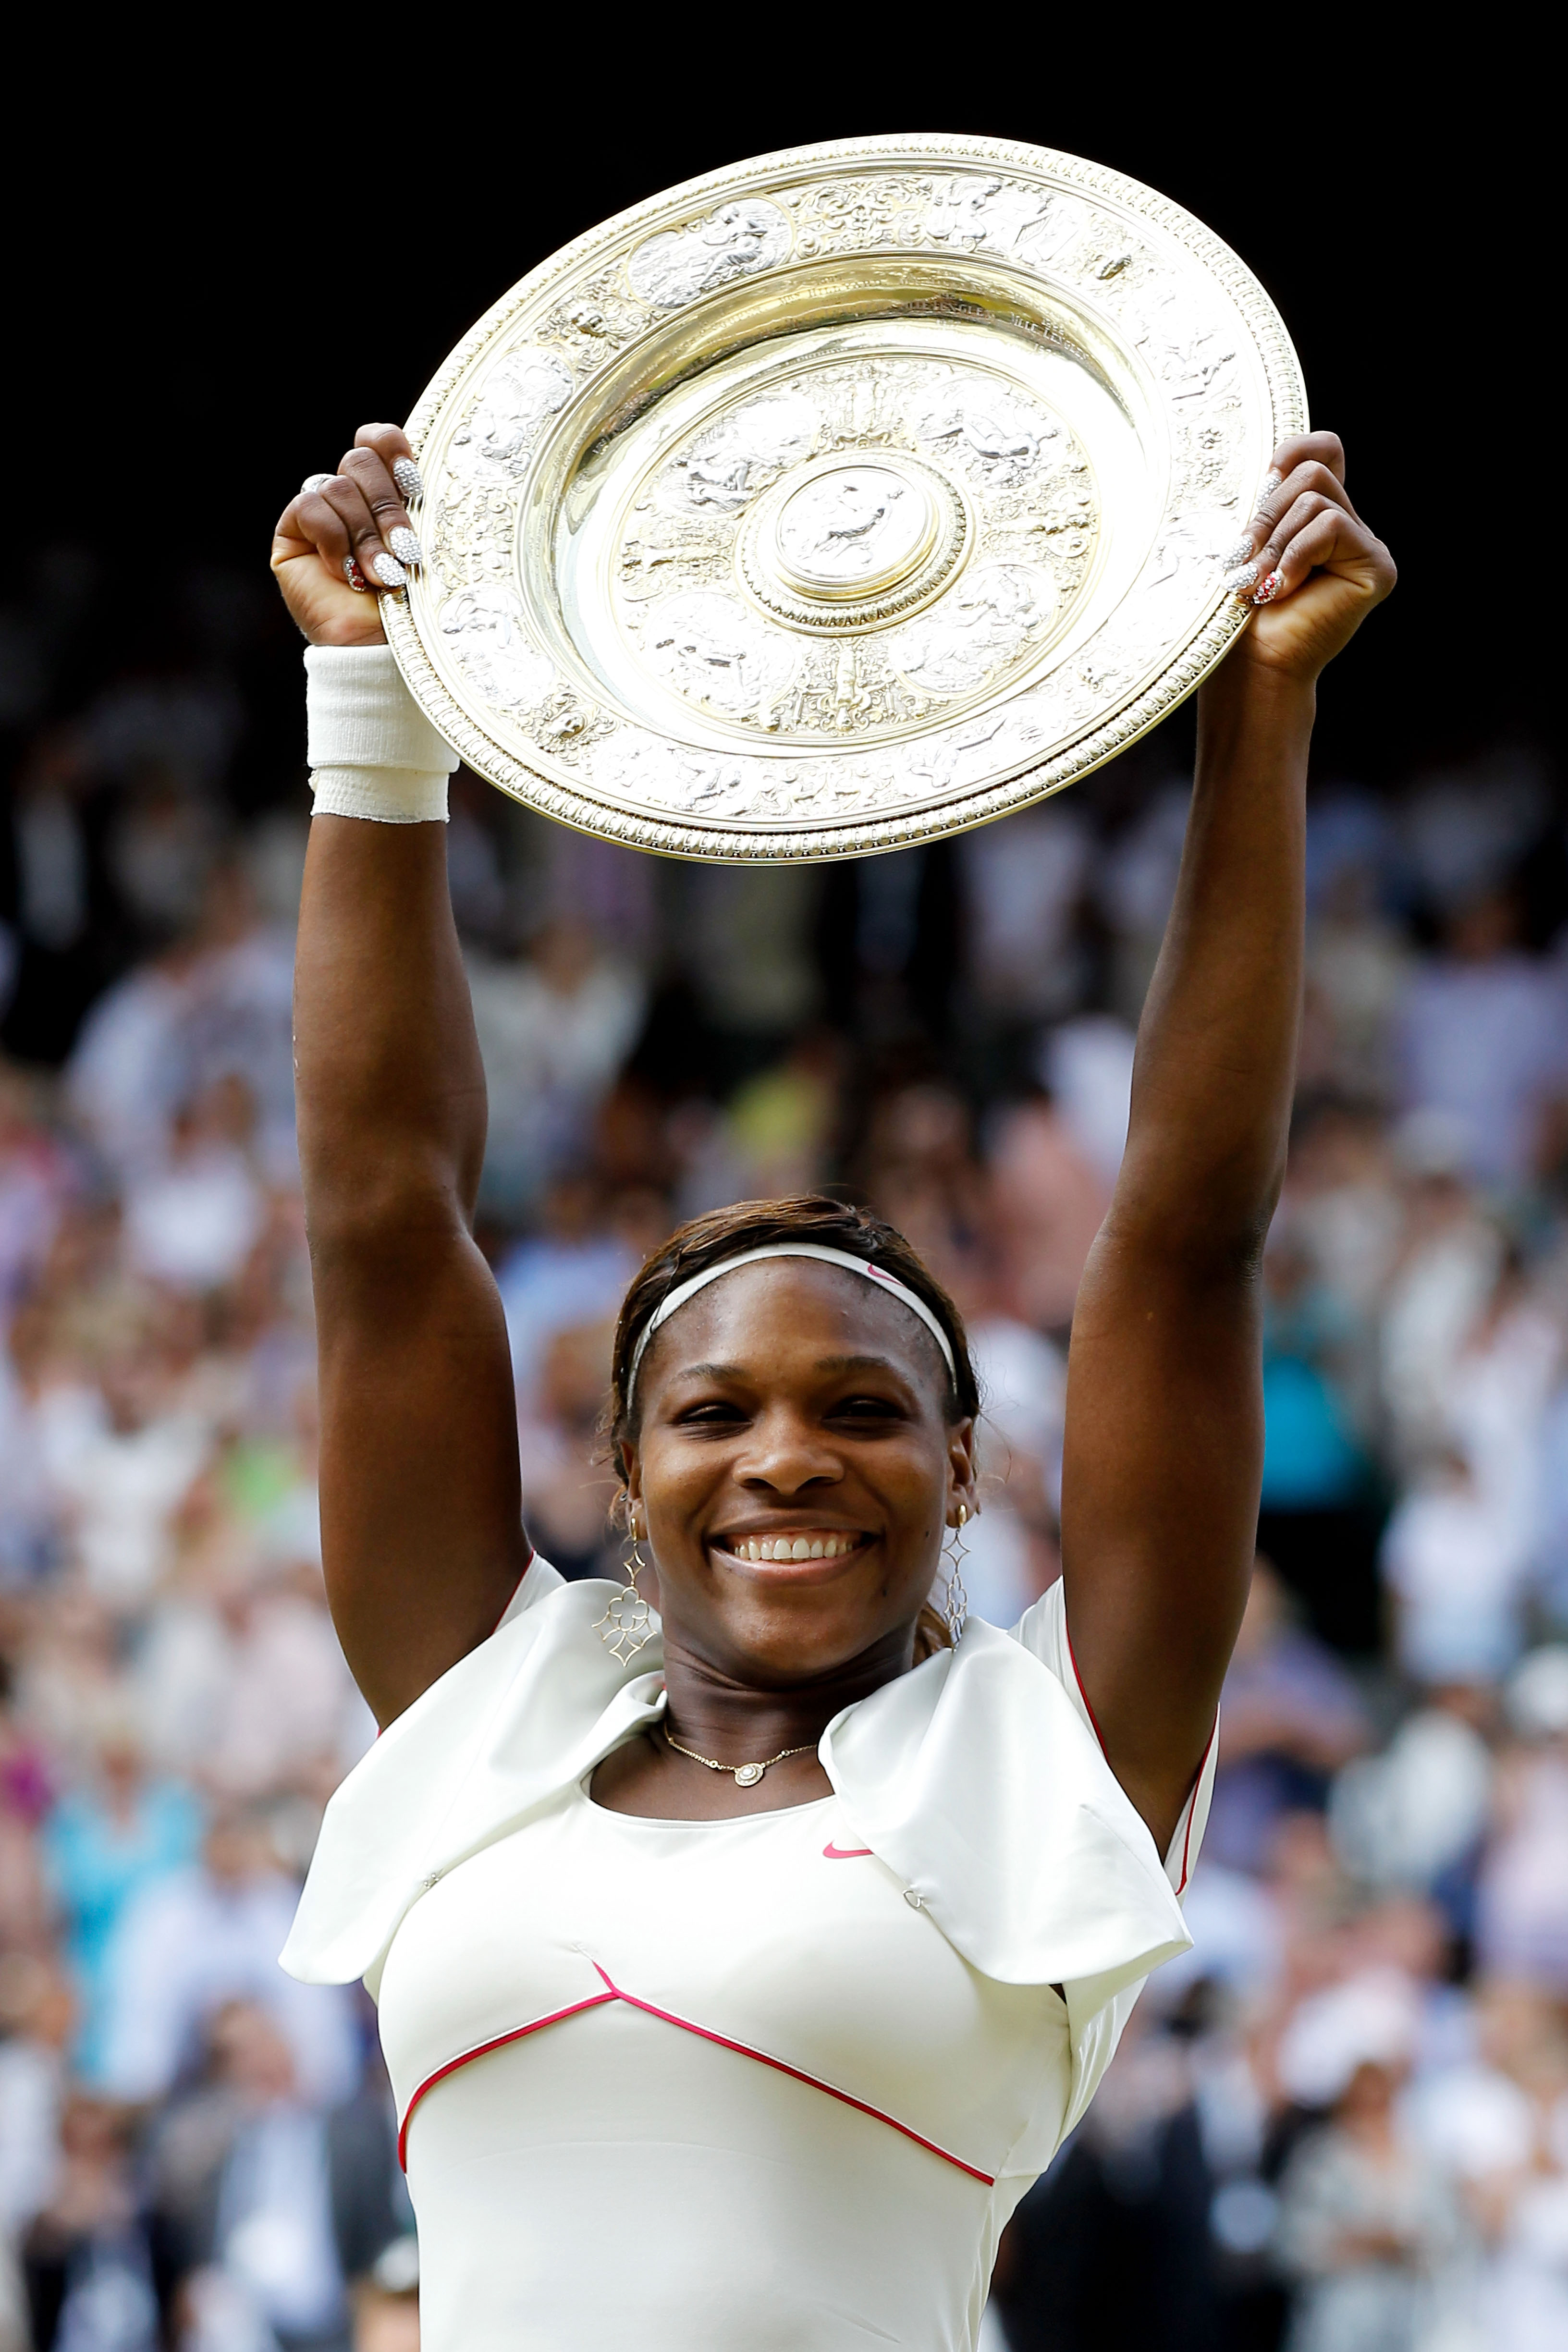 Serena Williams after she won Wimbledon in 2010.